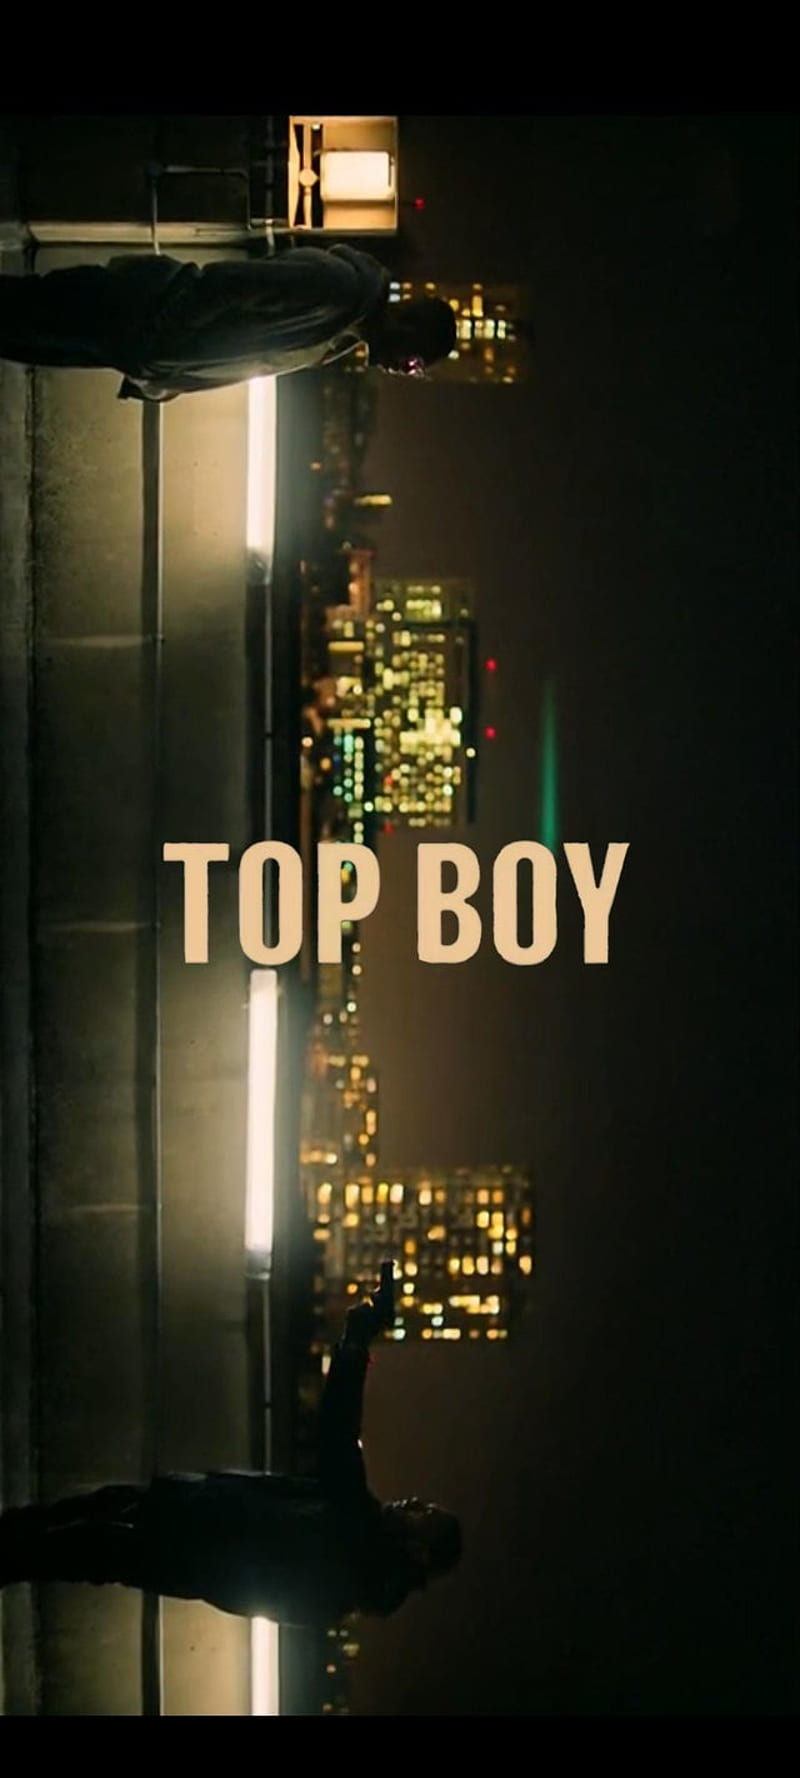 No For Topboy So I Made My Own : R Topboy, HD phone wallpaper